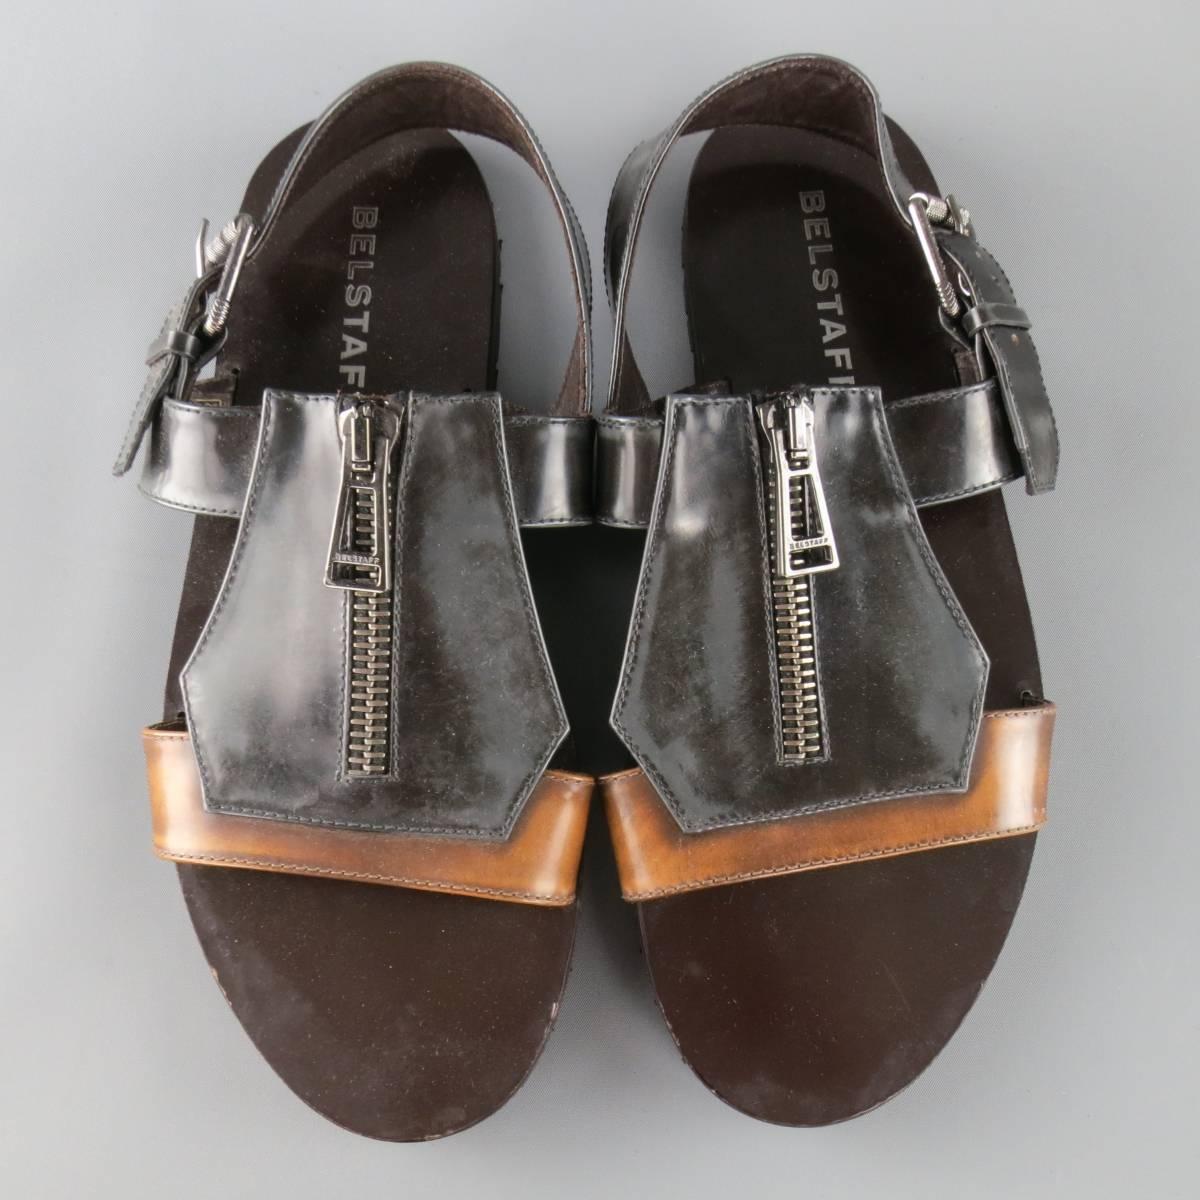 BELSTAFF sandals come in two tone distressed look tan and charcoal patent leather and feature a thick geometric patchwork statement front with gunmetal tone zipper and back strap with buckle. Made in Italy.
 
Good Pre-Owned Condition.
Marked: